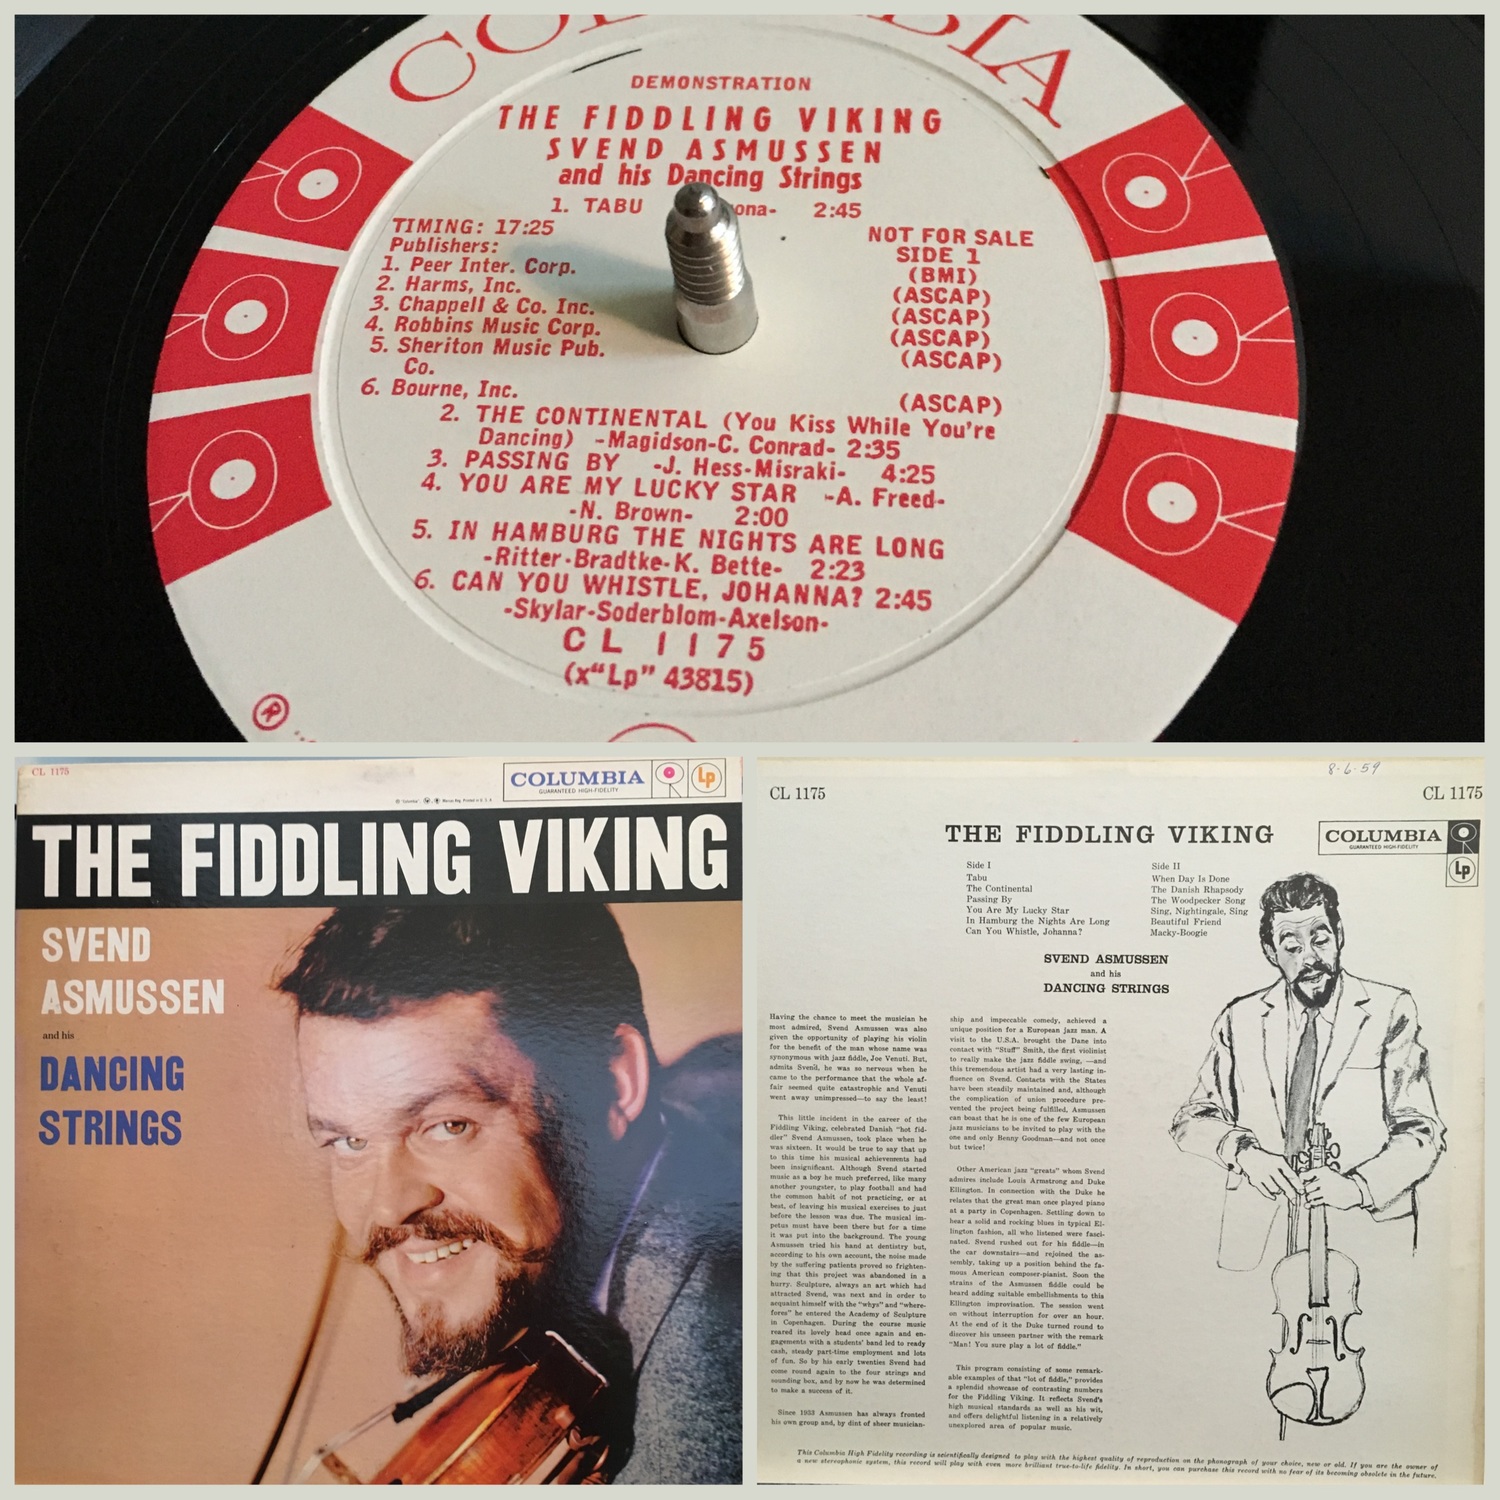 Episode 1: The Fiddling Viking by Svend Asmussen and his Dancing ...